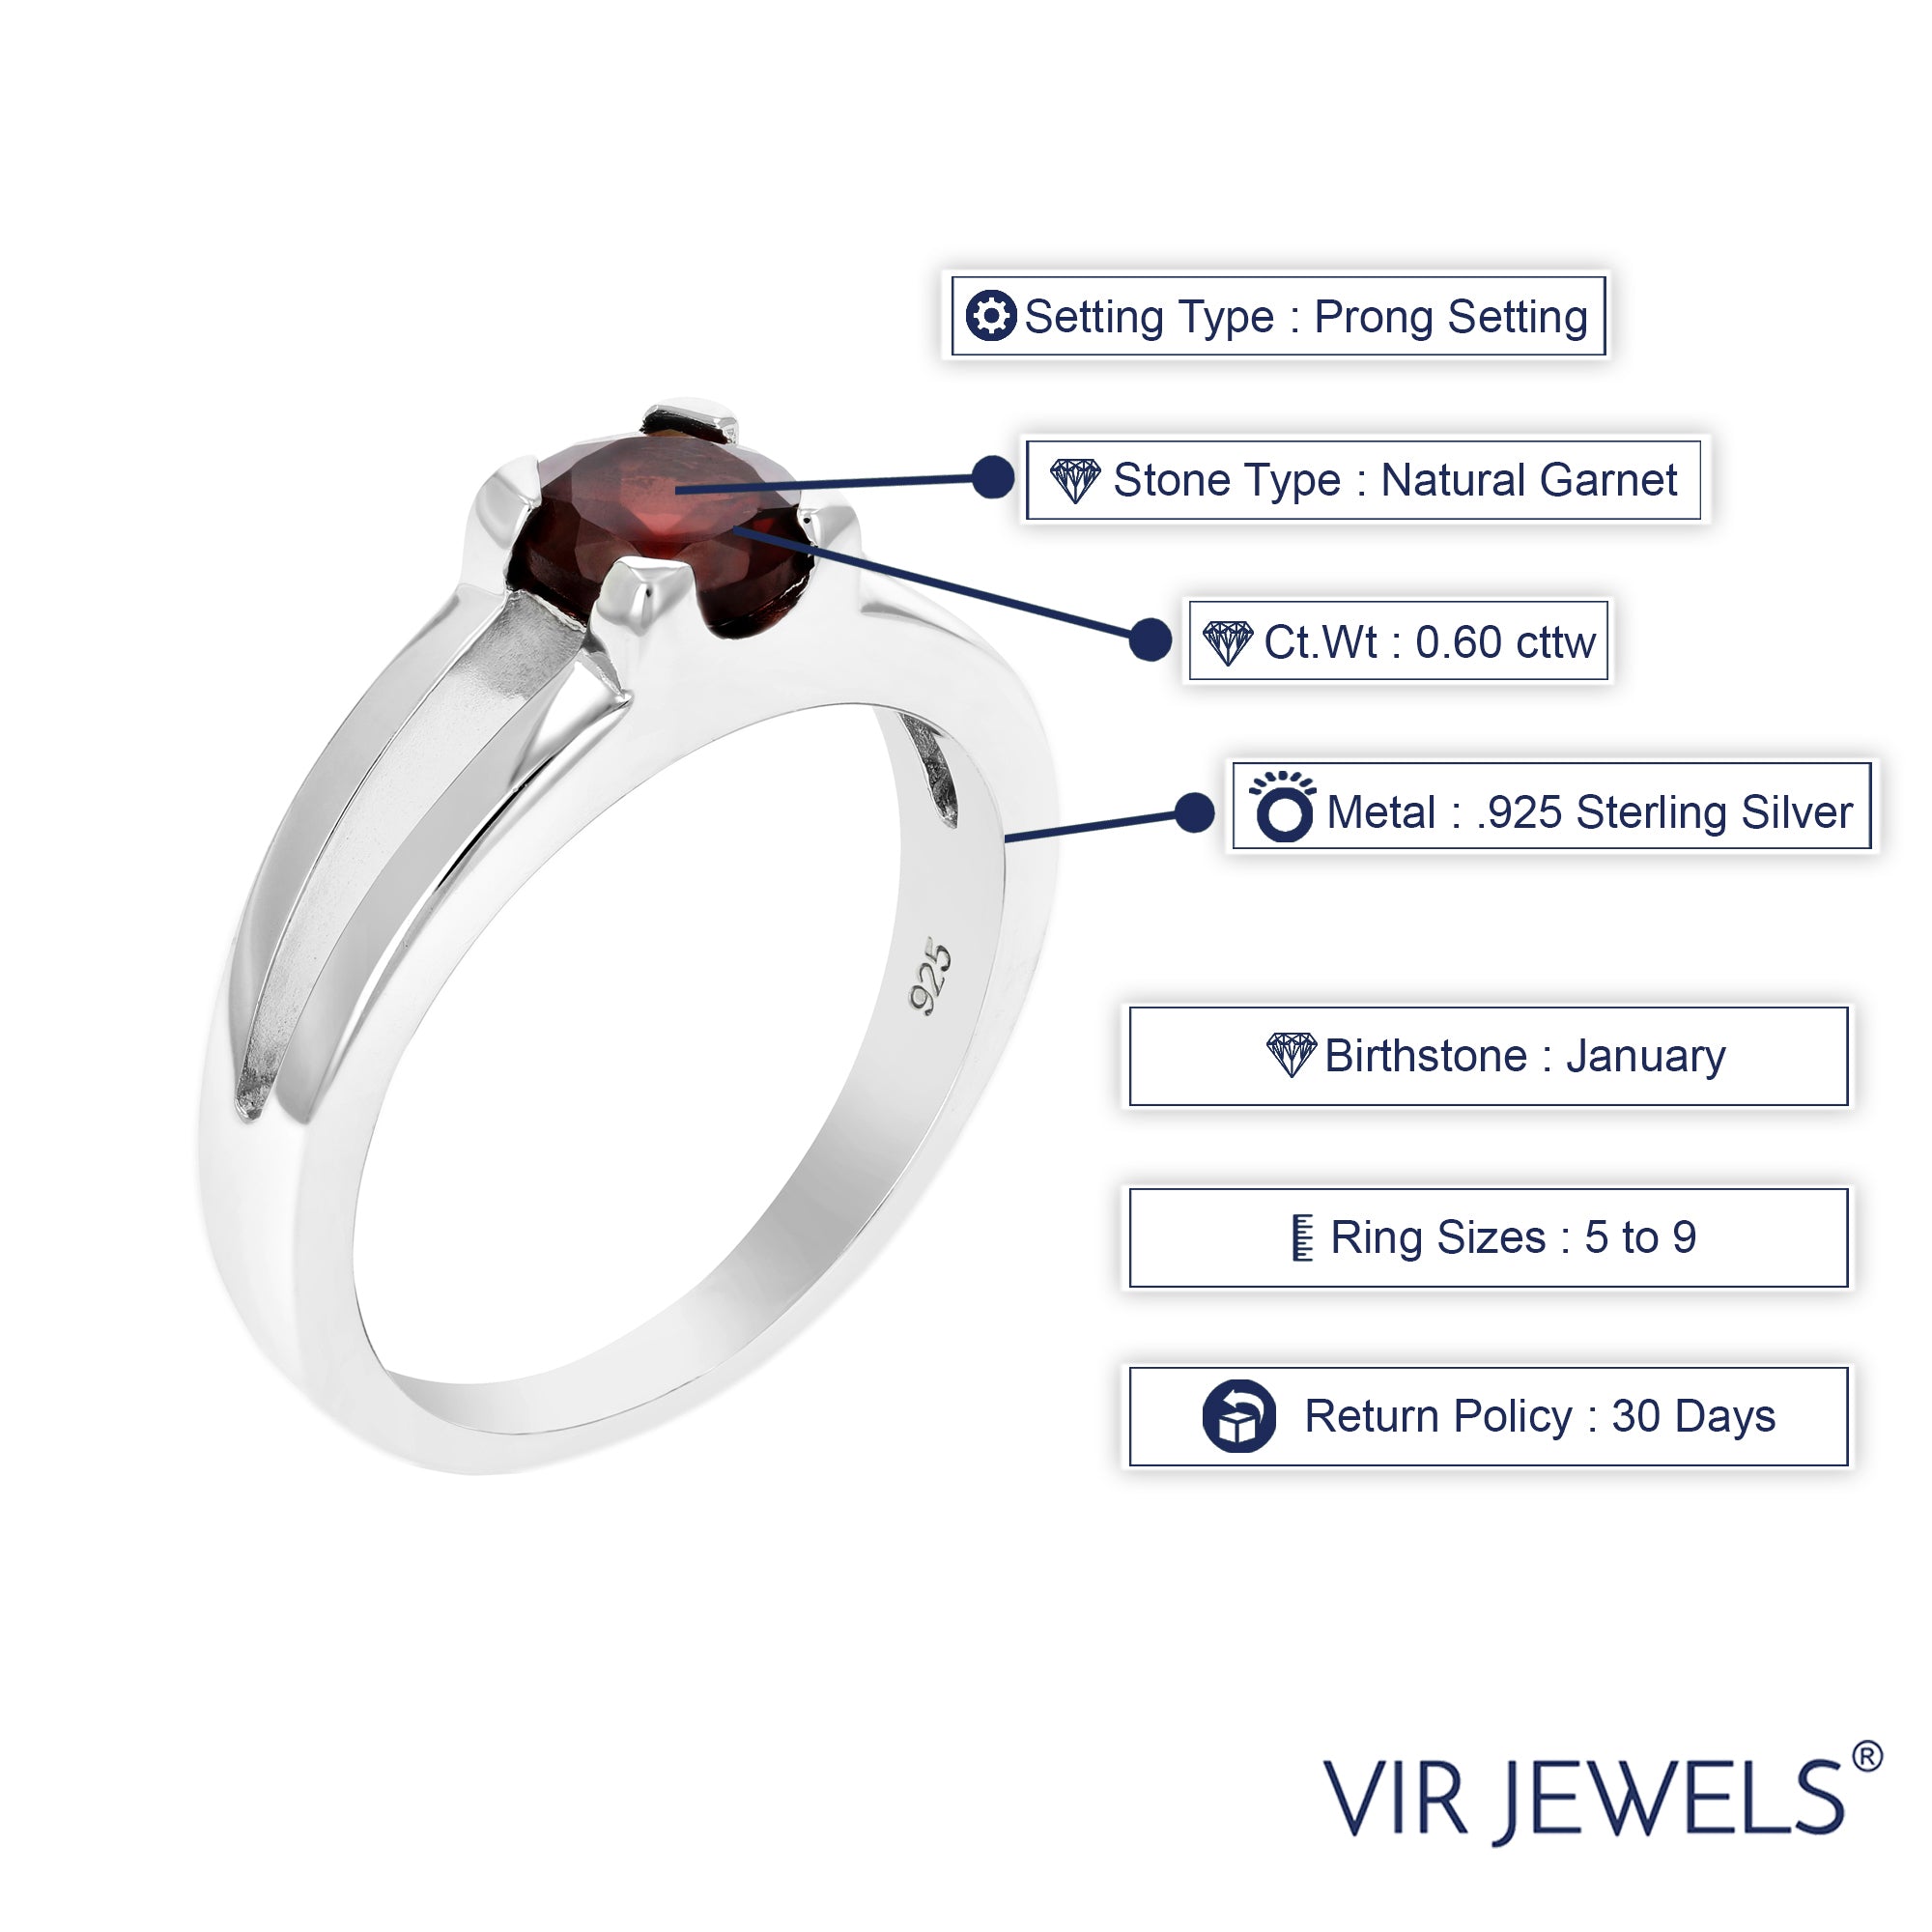 0.60 cttw Garnet Ring .925 Sterling Silver with Rhodium Plating Round Shape 6 MM